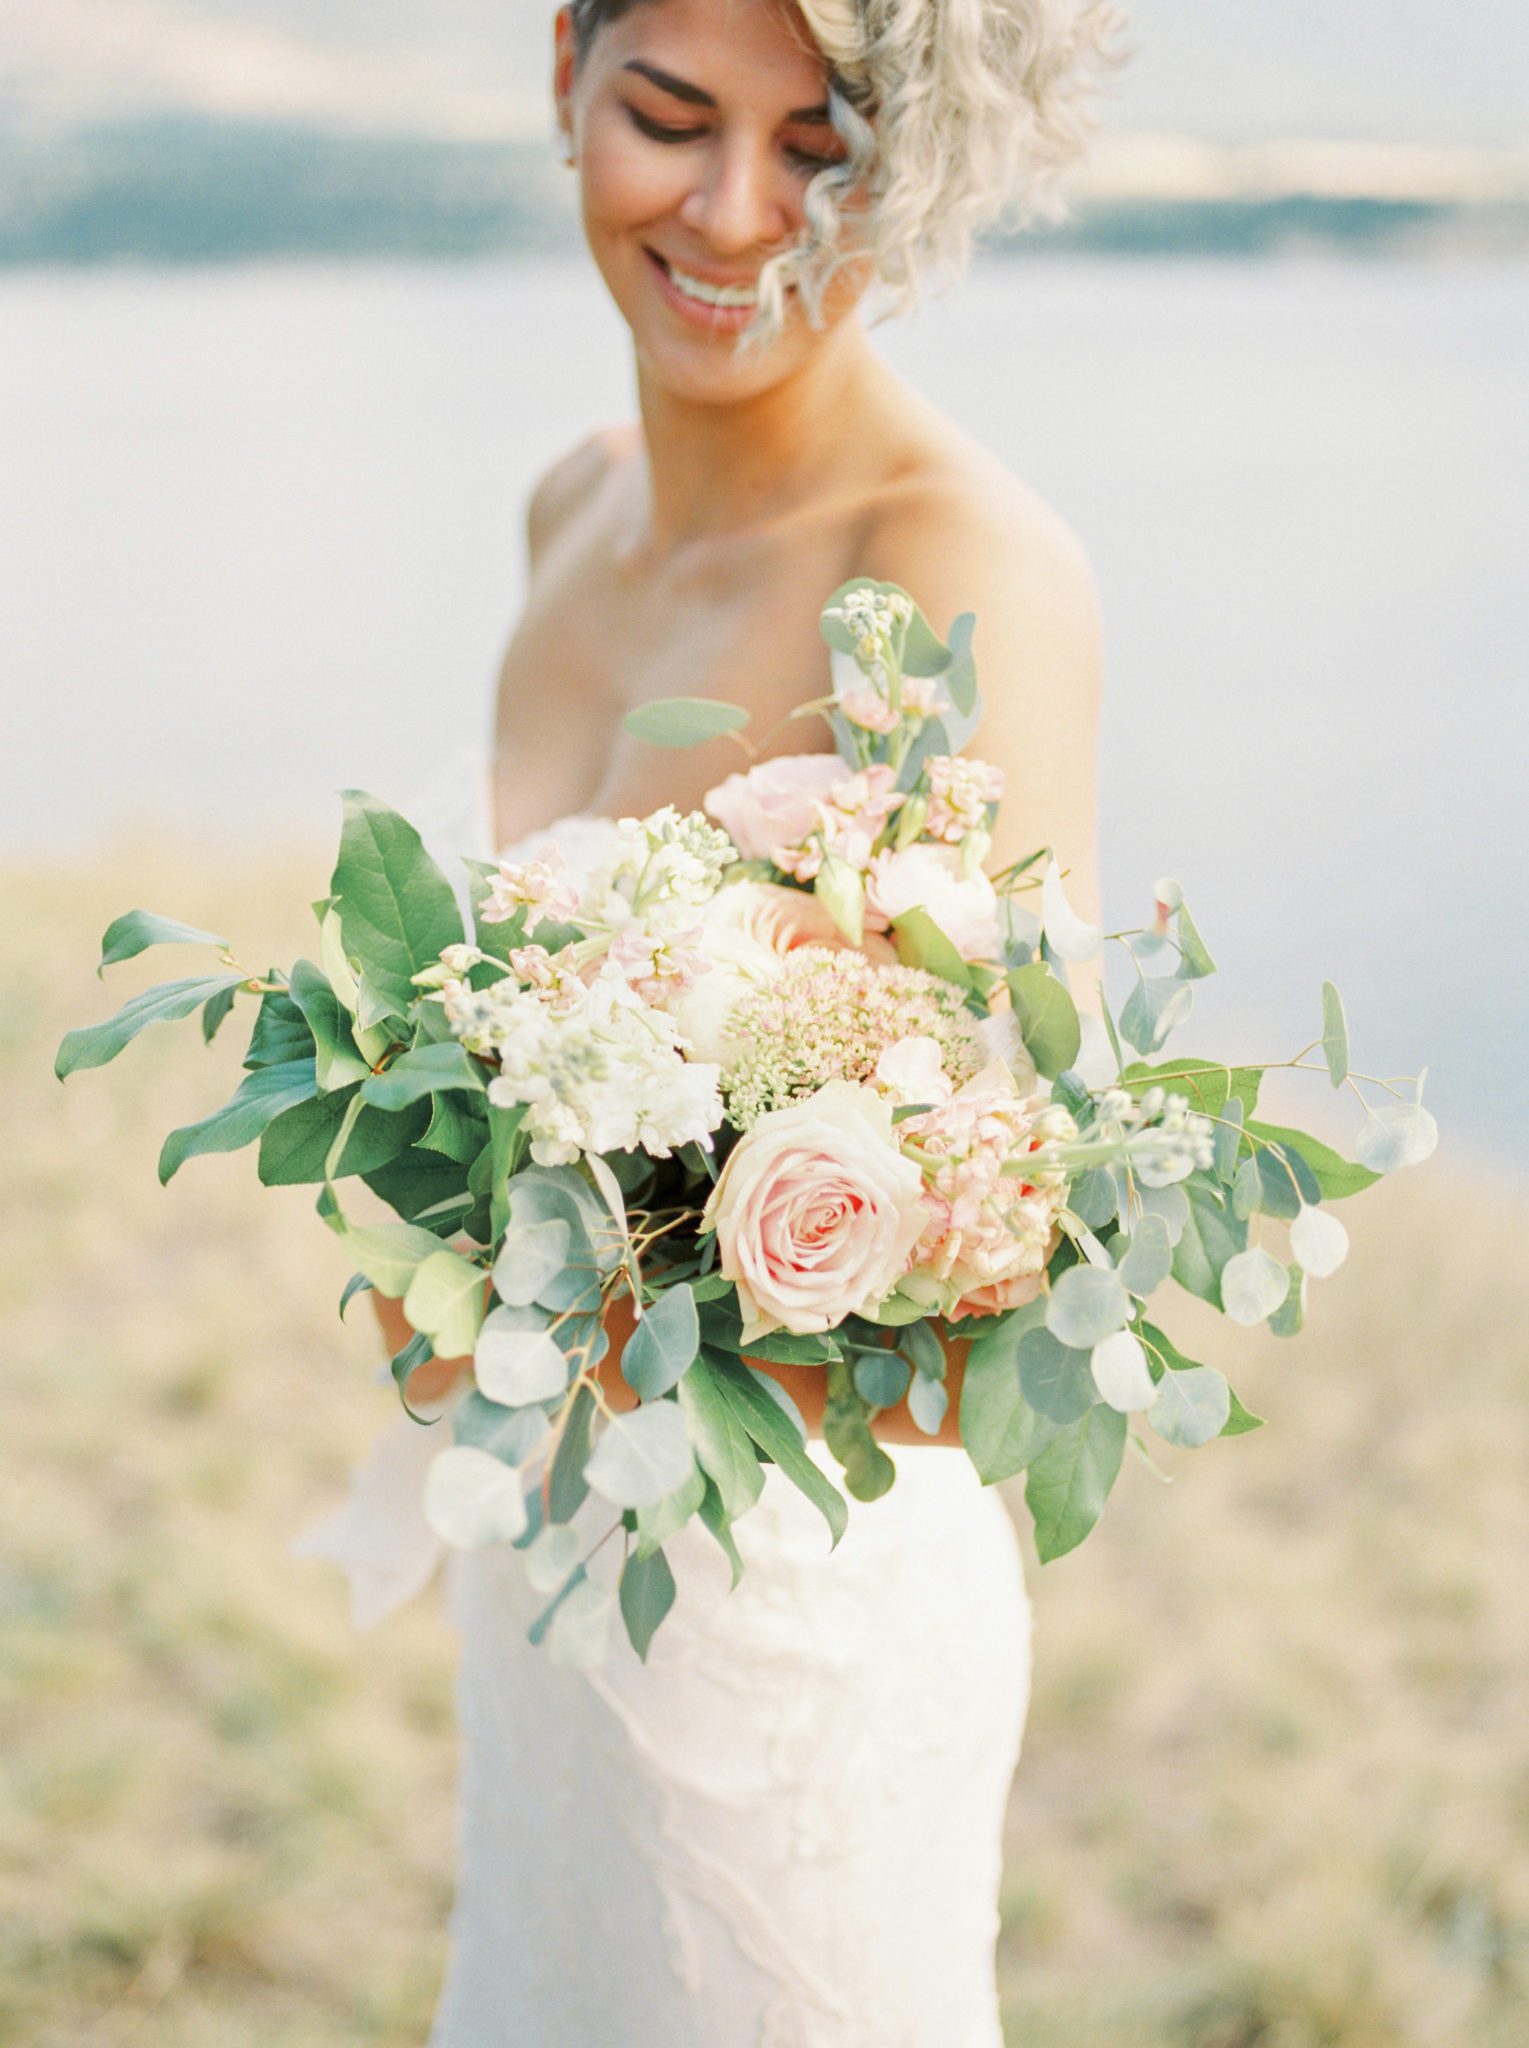 Bridal bouquet inspiration for a light and airy modern wedding